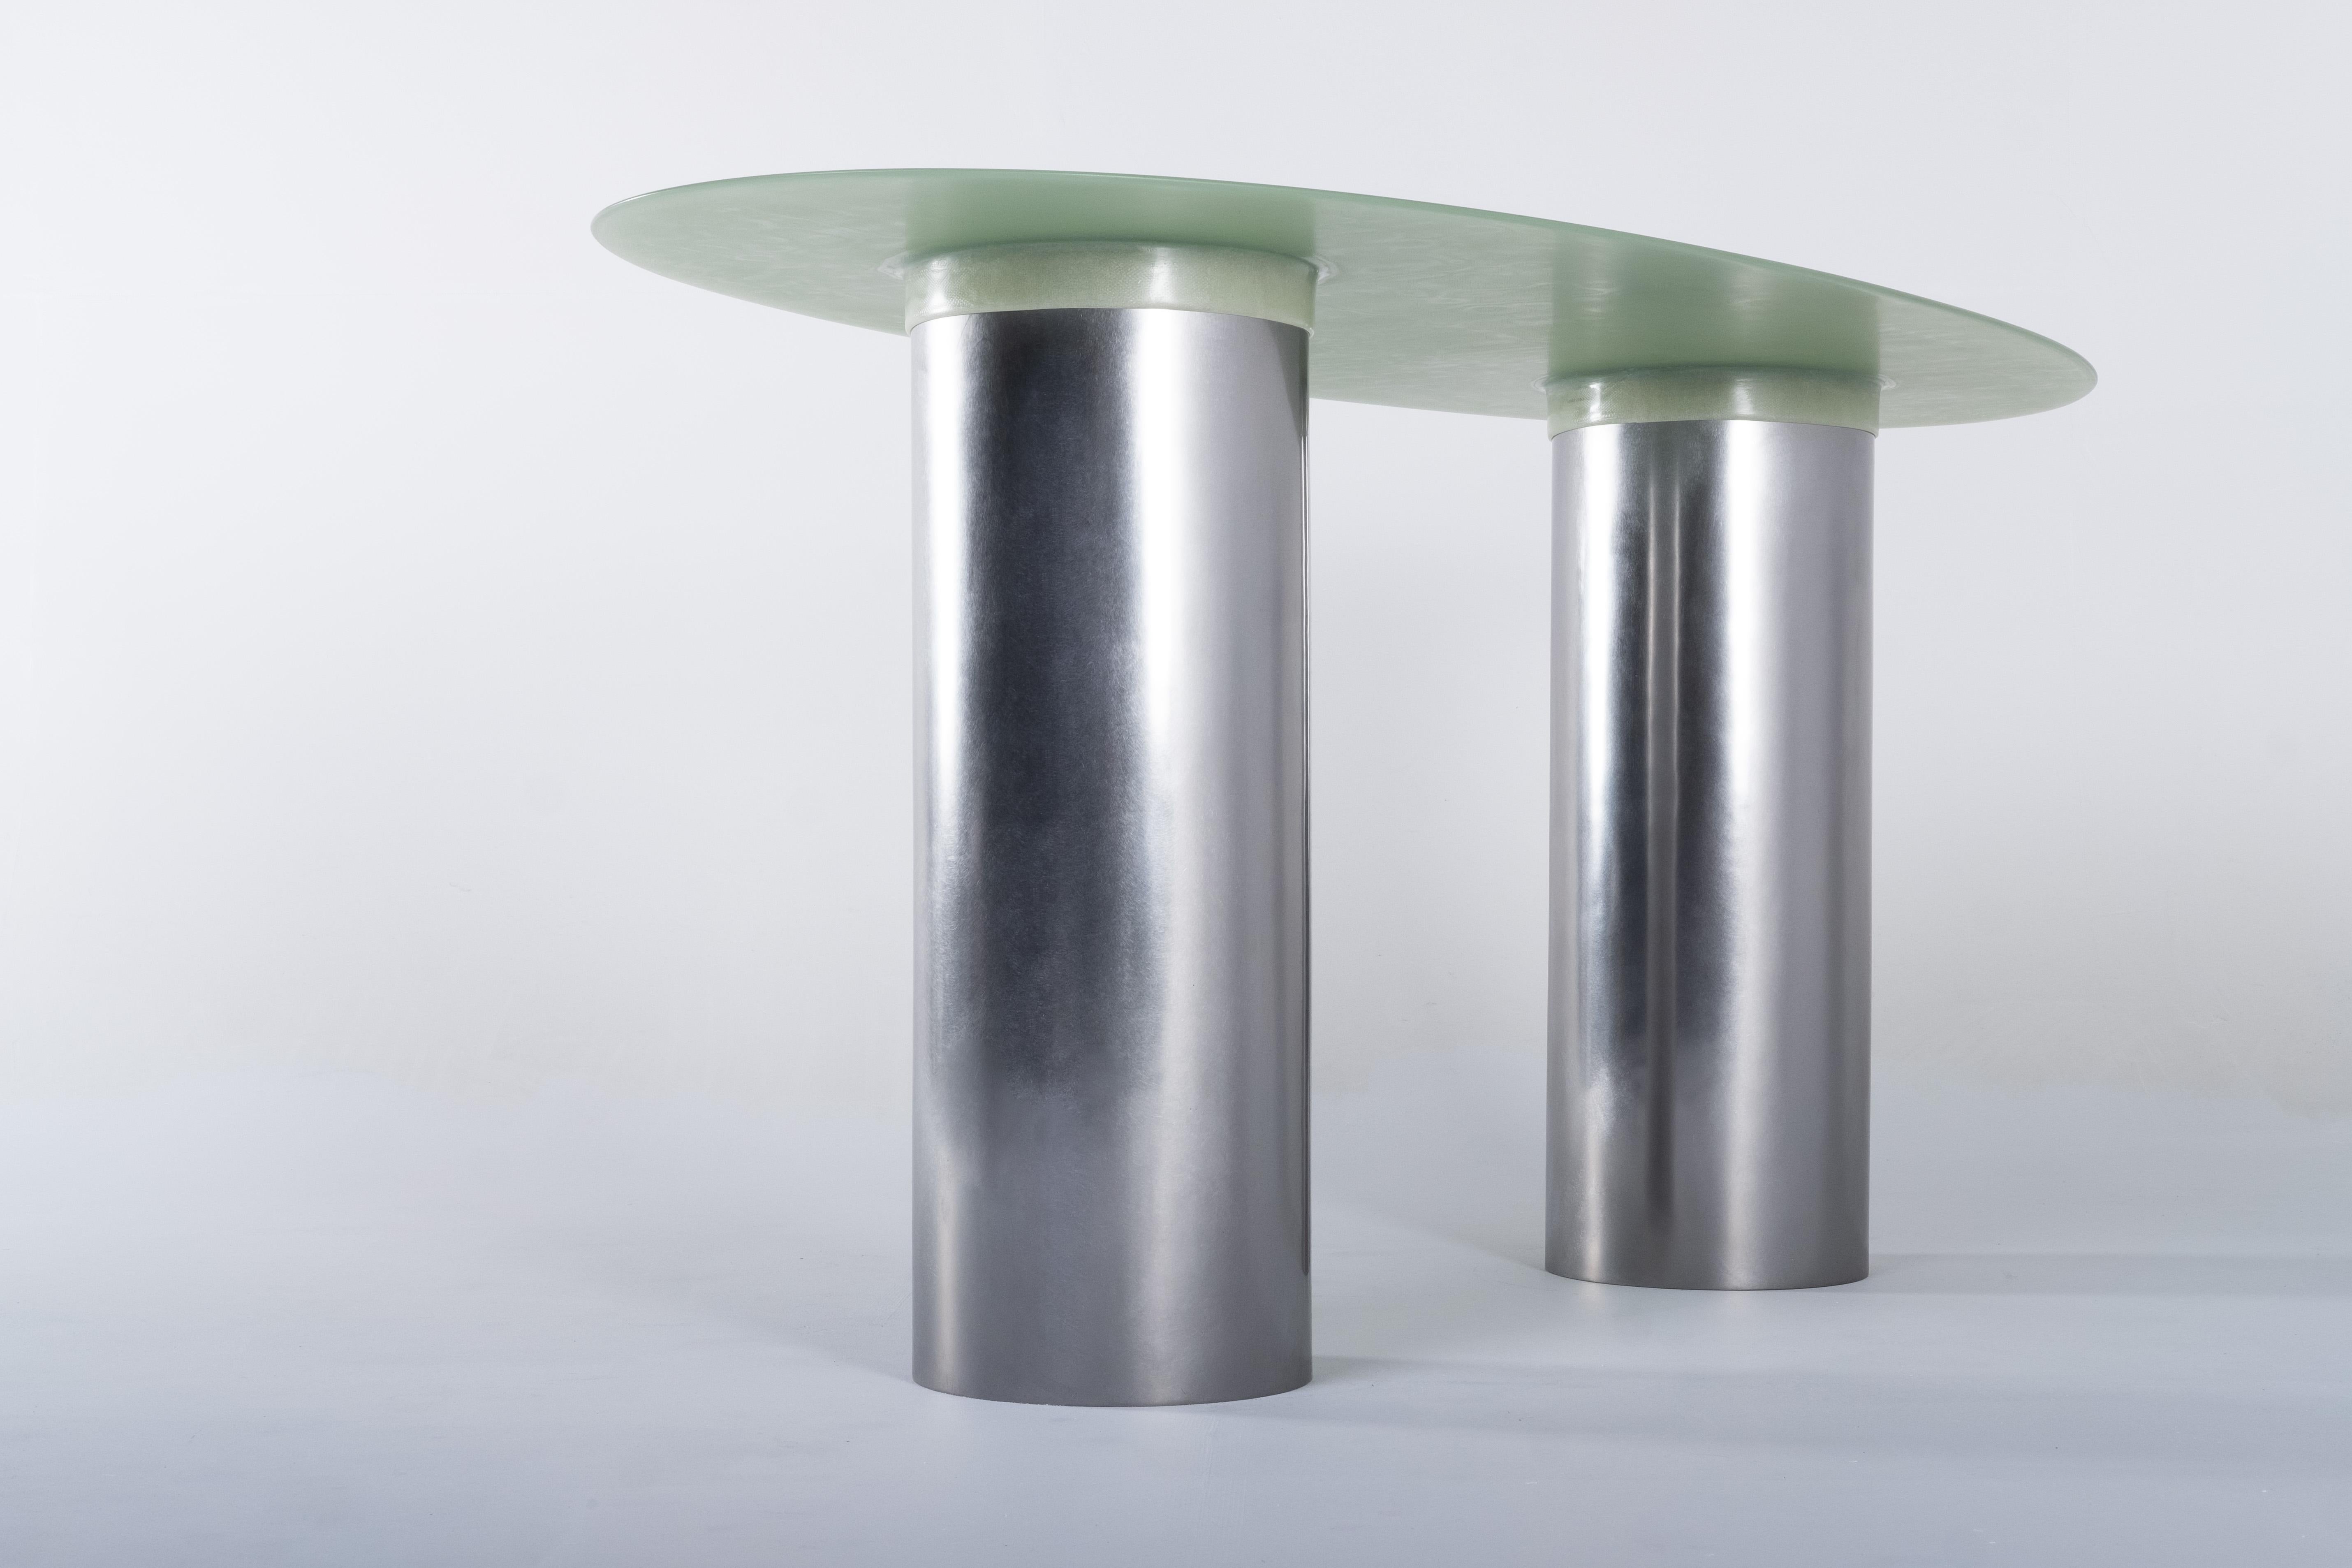 Hand-Crafted Contemporary Green transparant Fiberglass, Oval Desk Table 160cm, by Lukas Cober For Sale